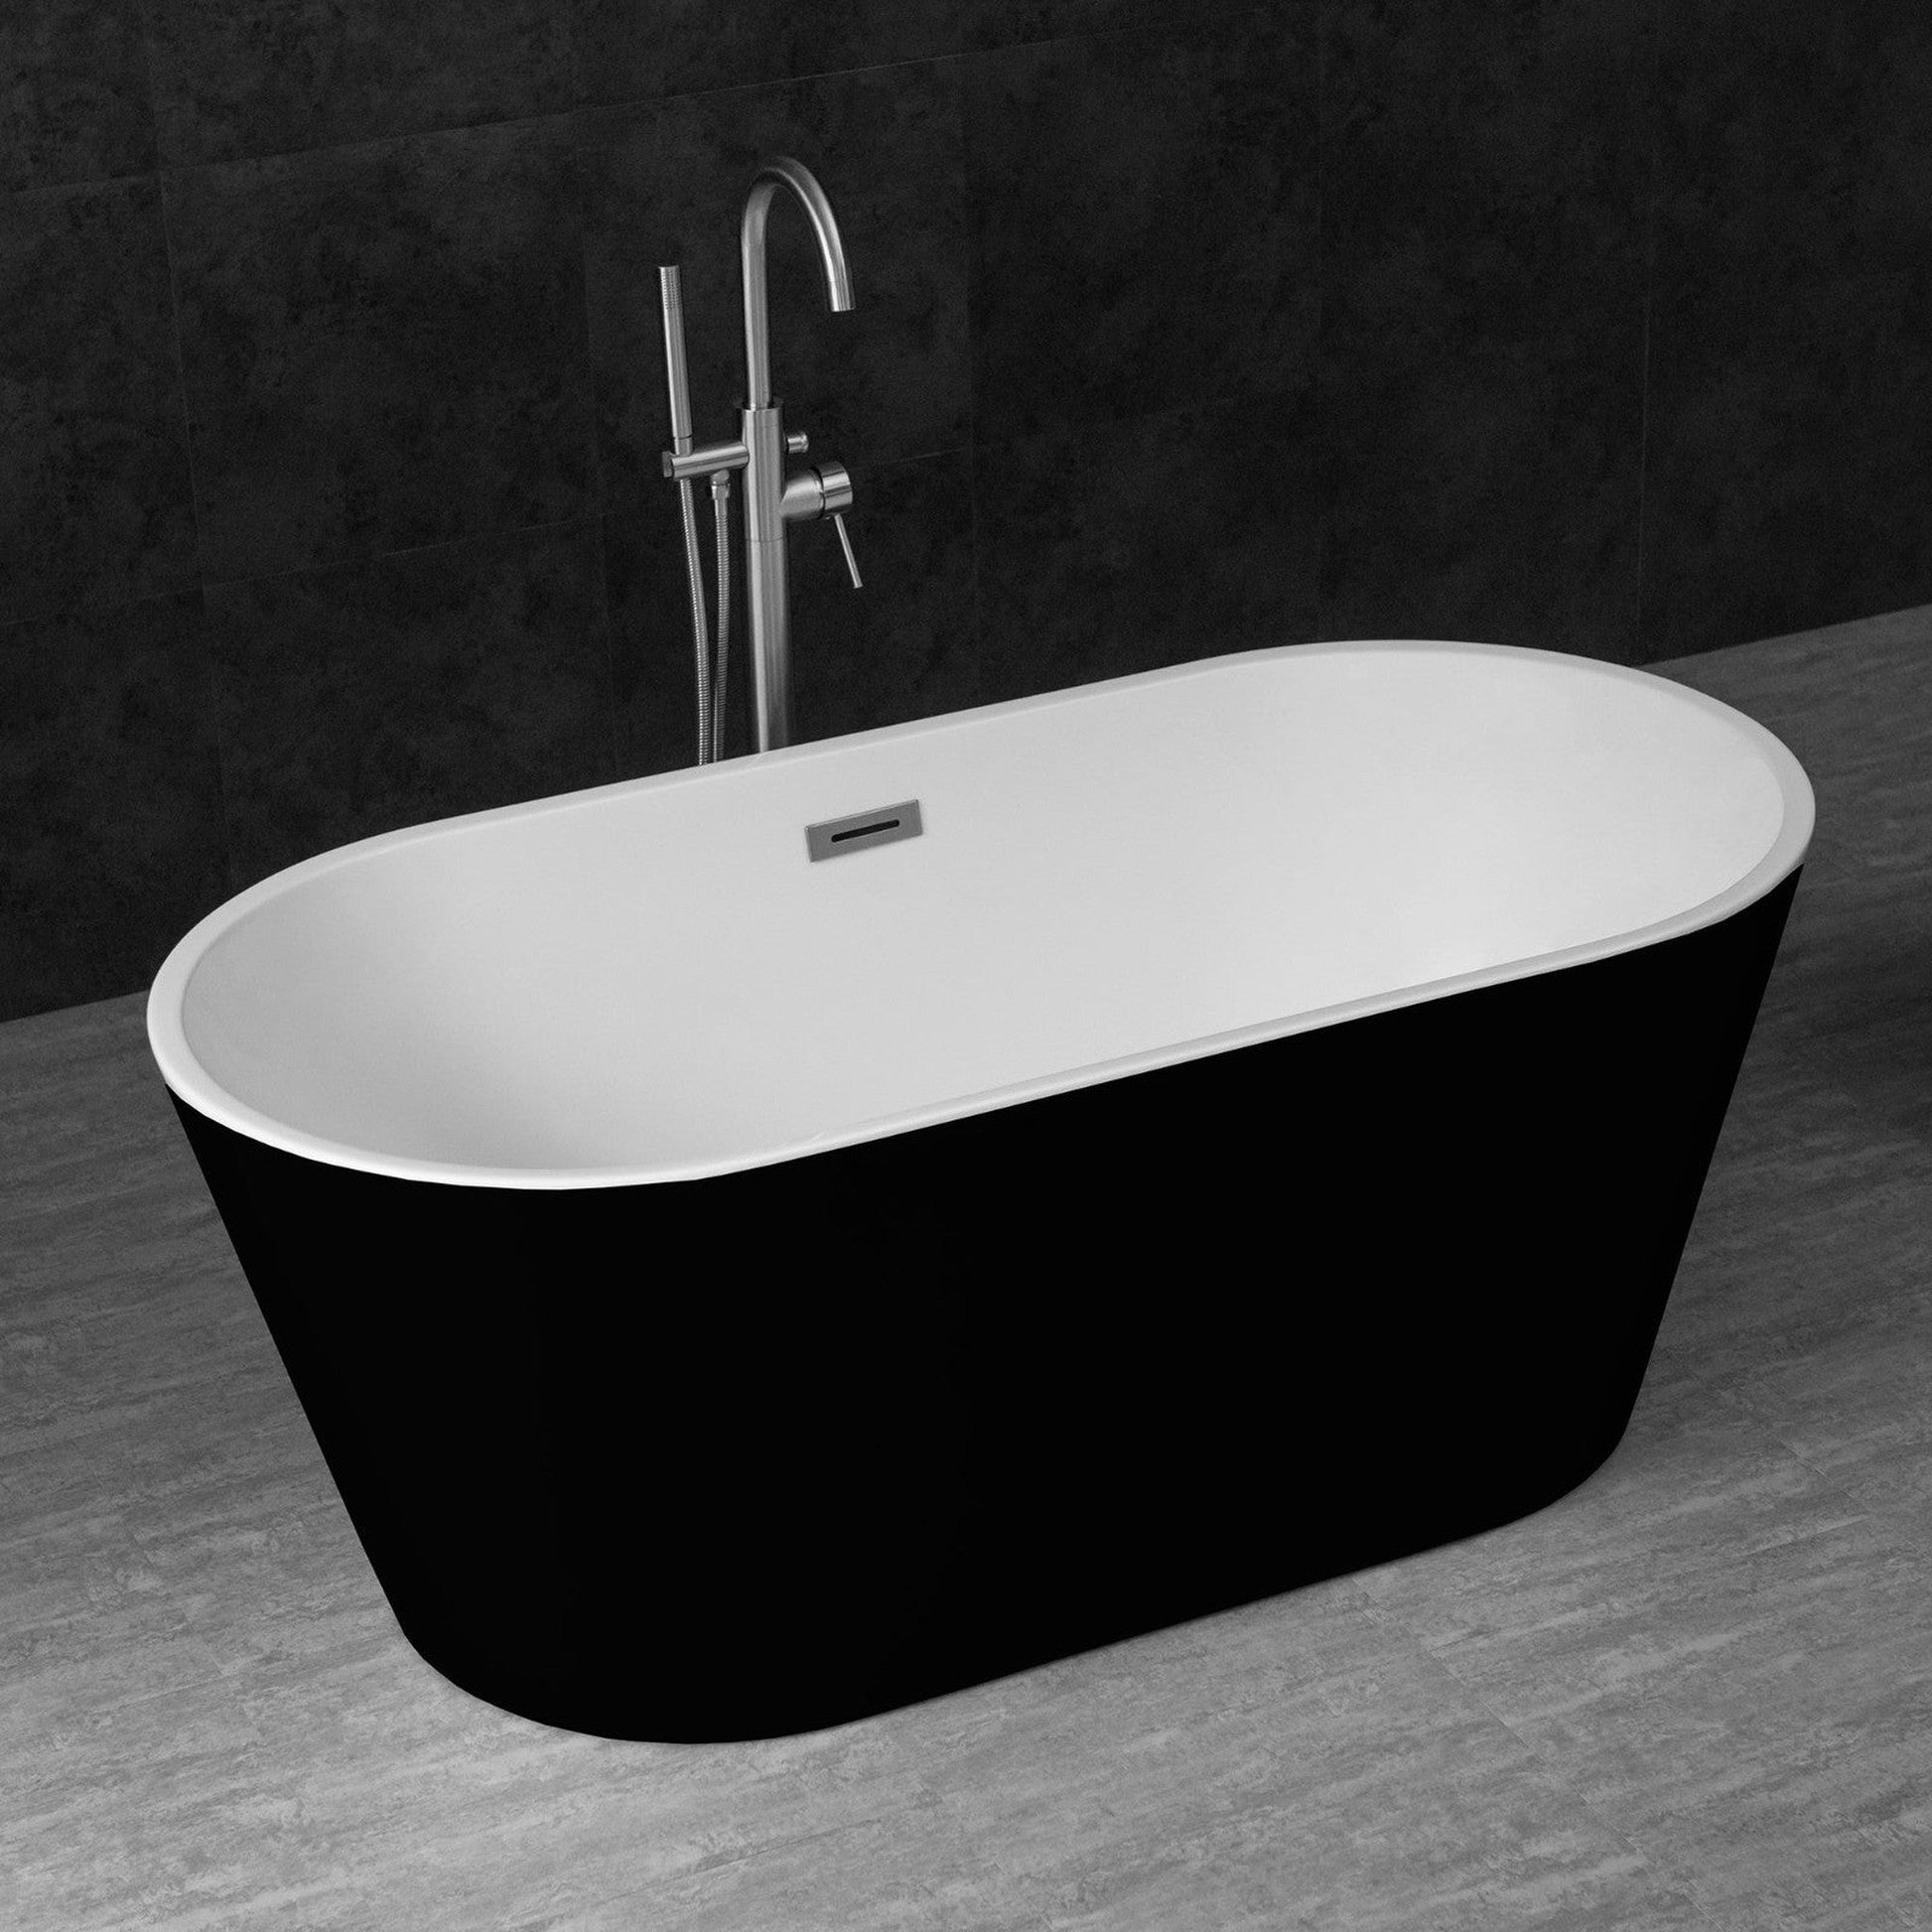 WoodBridge 59" Black Acrylic Freestanding Contemporary Soaking Bathtub With Brushed Nickel Drain, Overflow, F0070BNVT Tub Filler and Caddy Tray